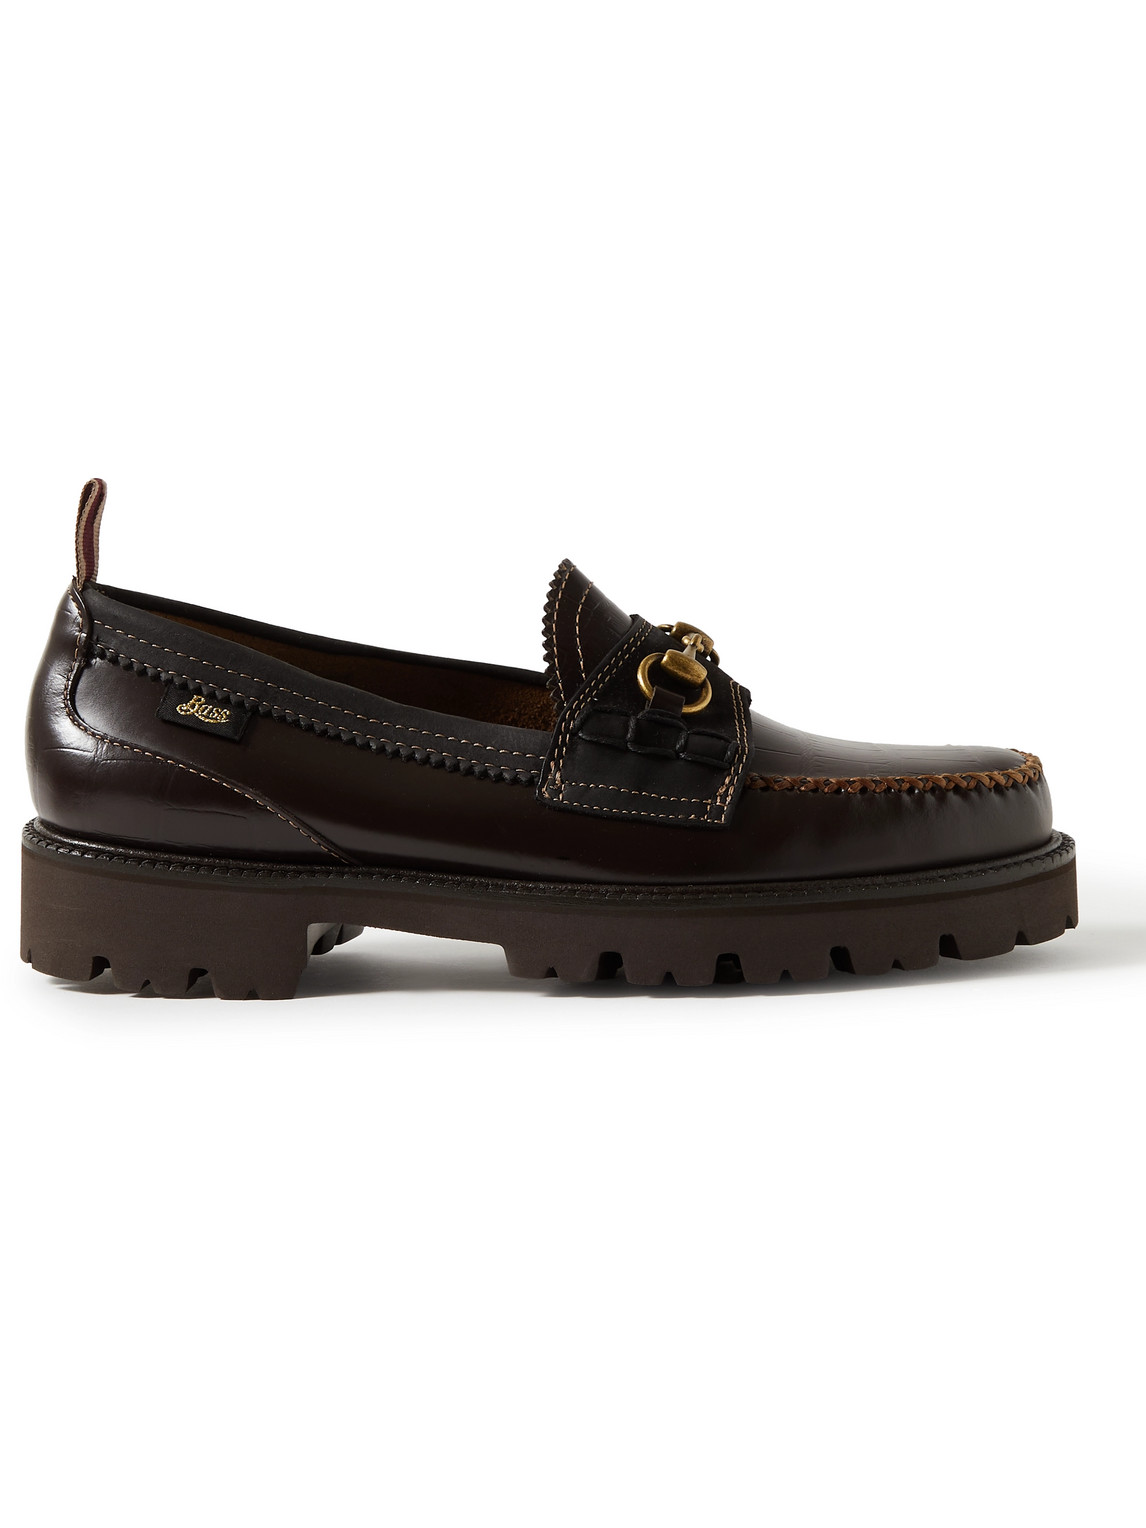 Nicholas Daley Lincoln Weejuns® Embellished Suede-Trimmed Croc-Effect Leather Loafers